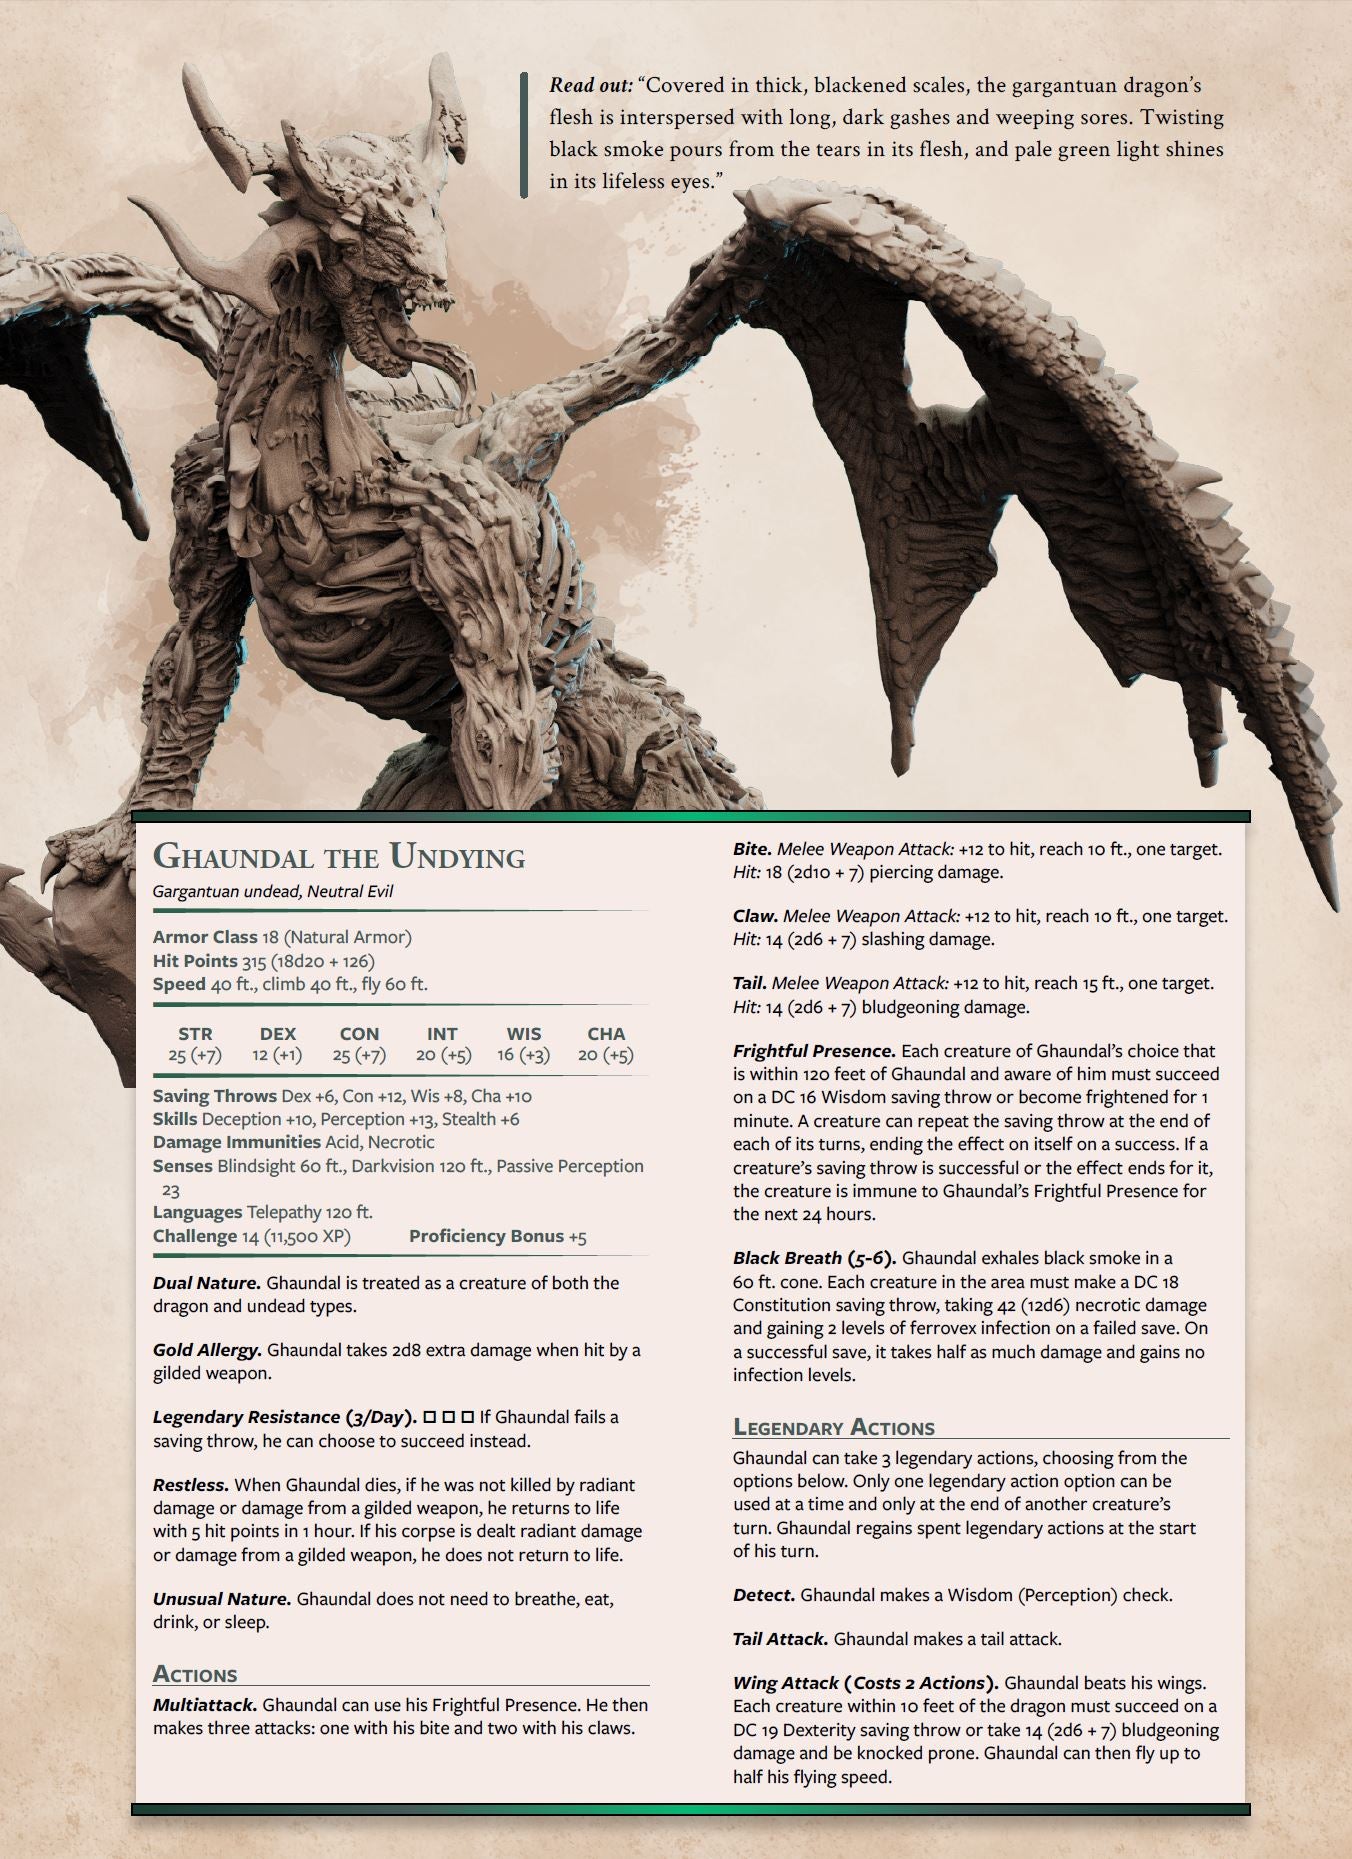 Ghaundal the Undying - Untote Drache Boss Miniatur | Dungeons and Dragons | Tabletop | Pathfinder | D&D | Mammoth Factory